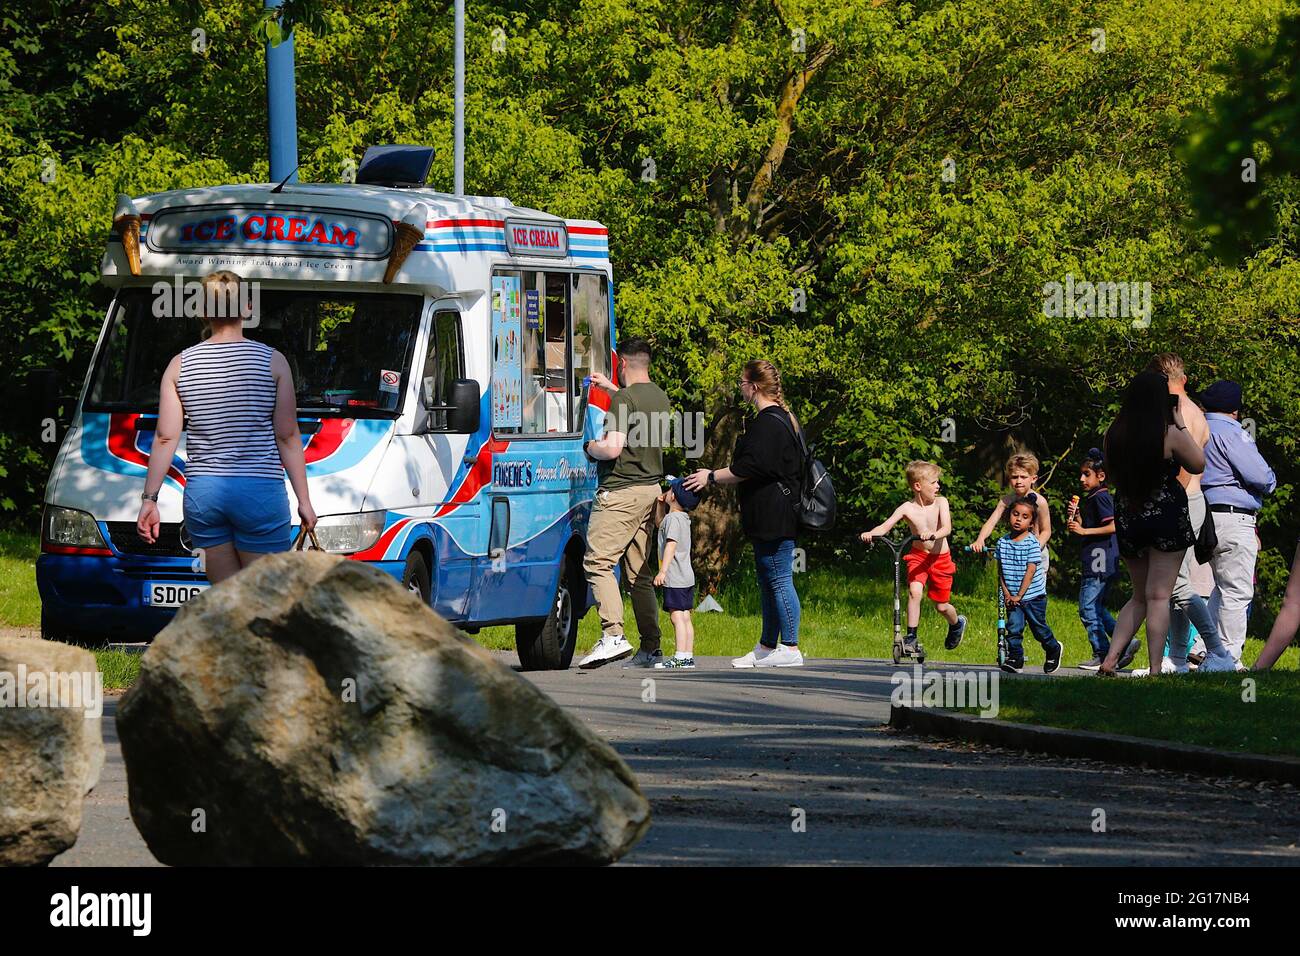 Maidstone, Kent, UK. 05 Jun, 2021. UK Weather: Hot and sunny day in the Mote Park, spanning over 180 hectares, the park is freely accessible to the public and features activities such as children's play areas, dino golf, Sky Trail, climbing wall, watersports centre & leisure centre. Ice cream van serving a queue of customers in the park. Photo Credit: Paul Lawrenson /Alamy Live News Stock Photo